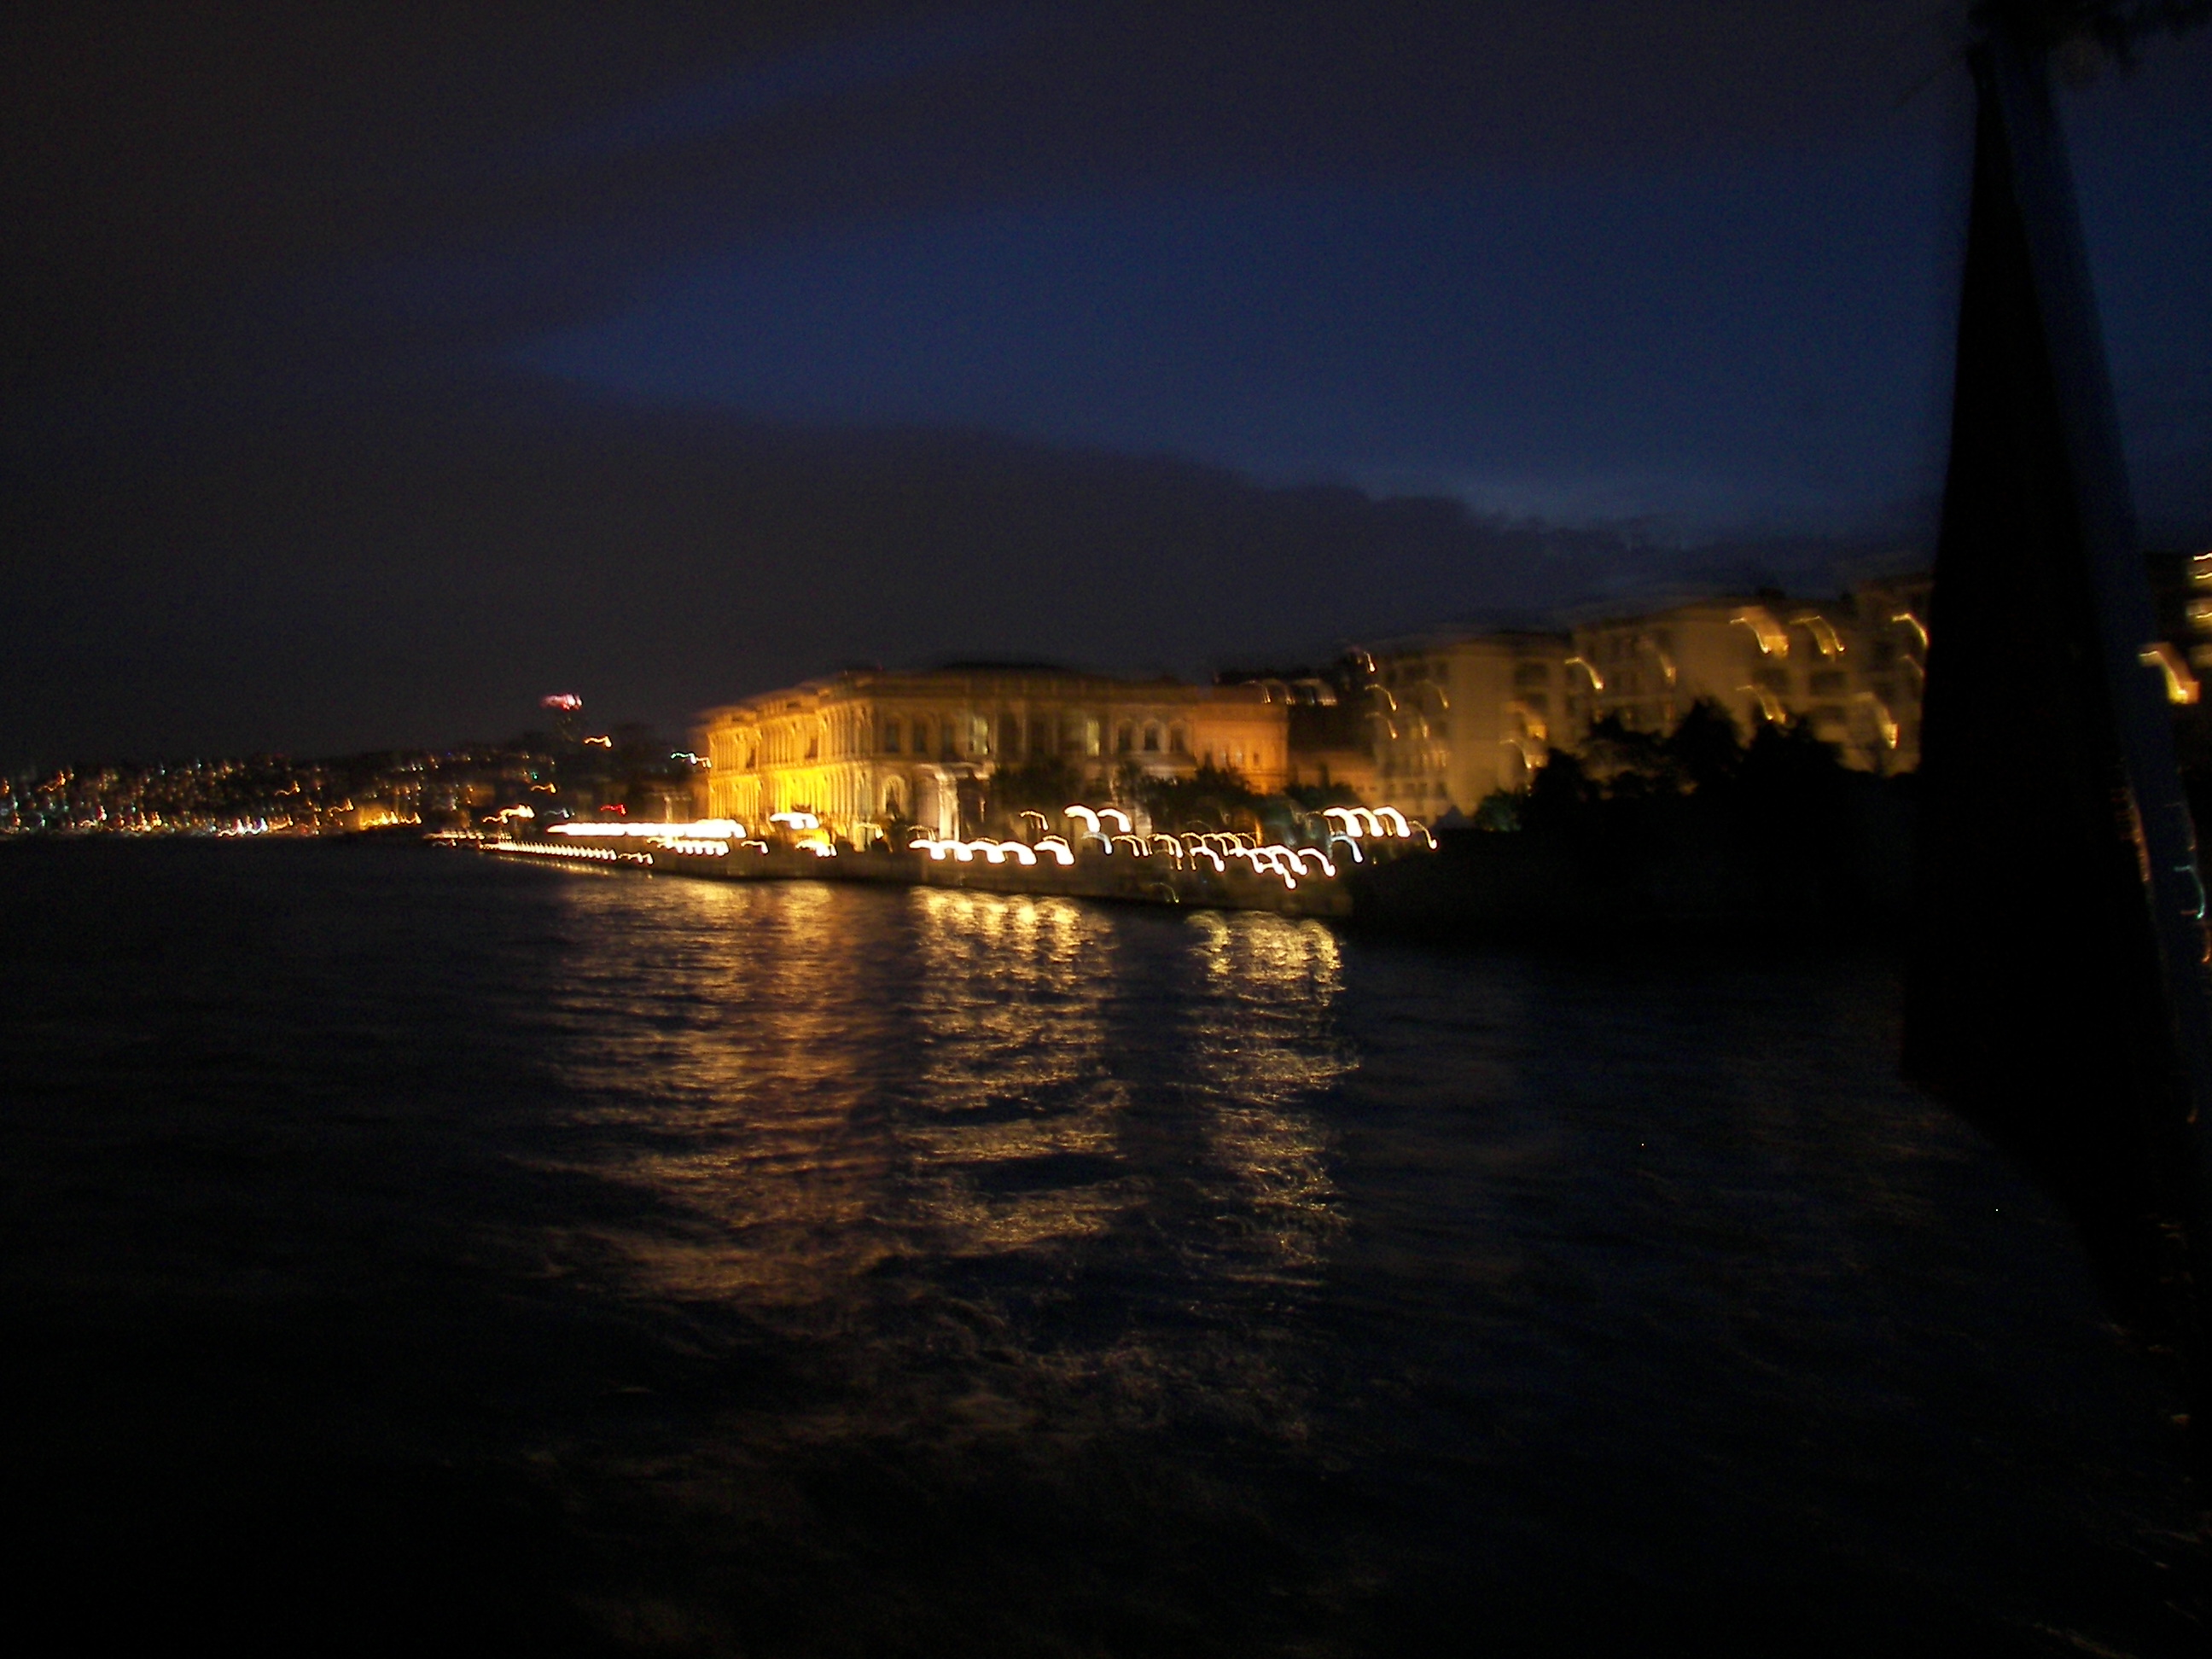 2010-03-26 - Istanbultrip - 010